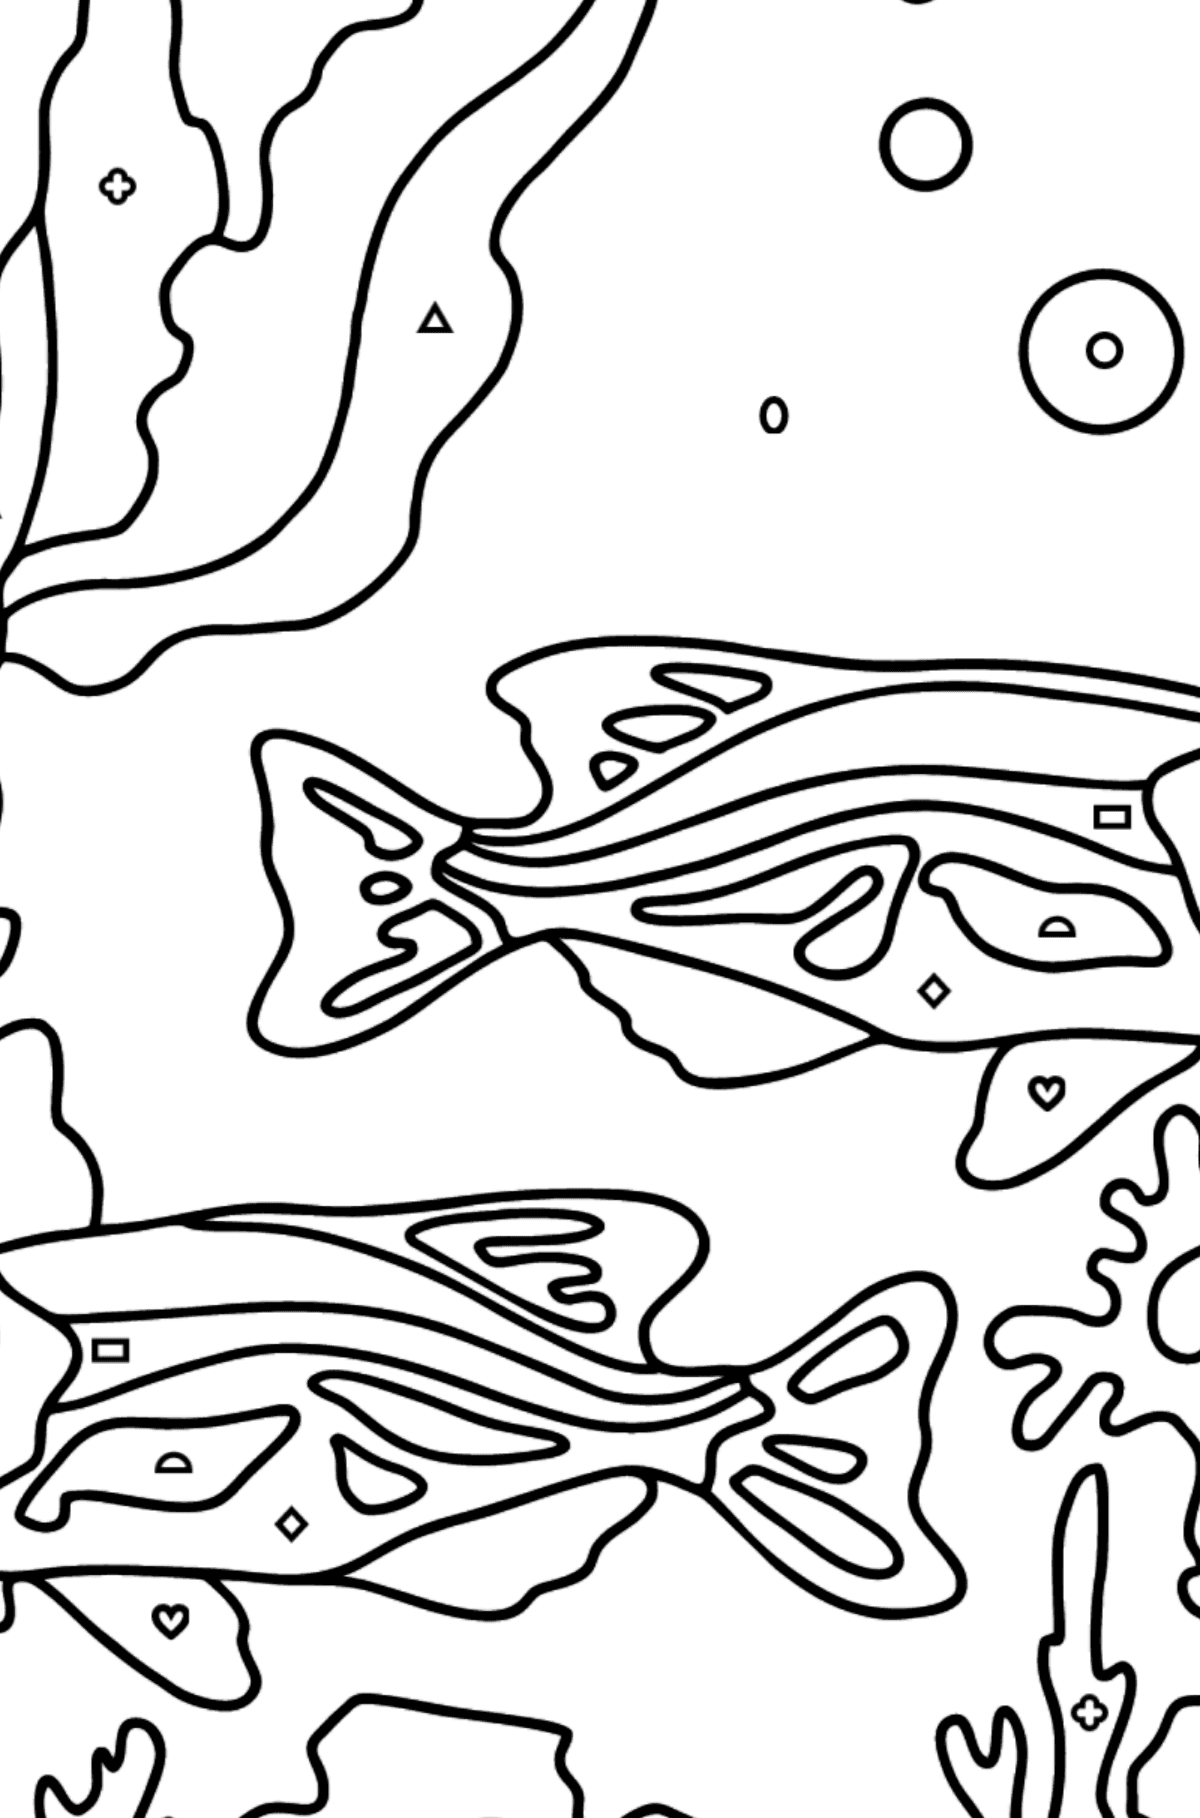 Coloring Page - Fish are Swimming Together Peacefully - Coloring by Geometric Shapes for Kids